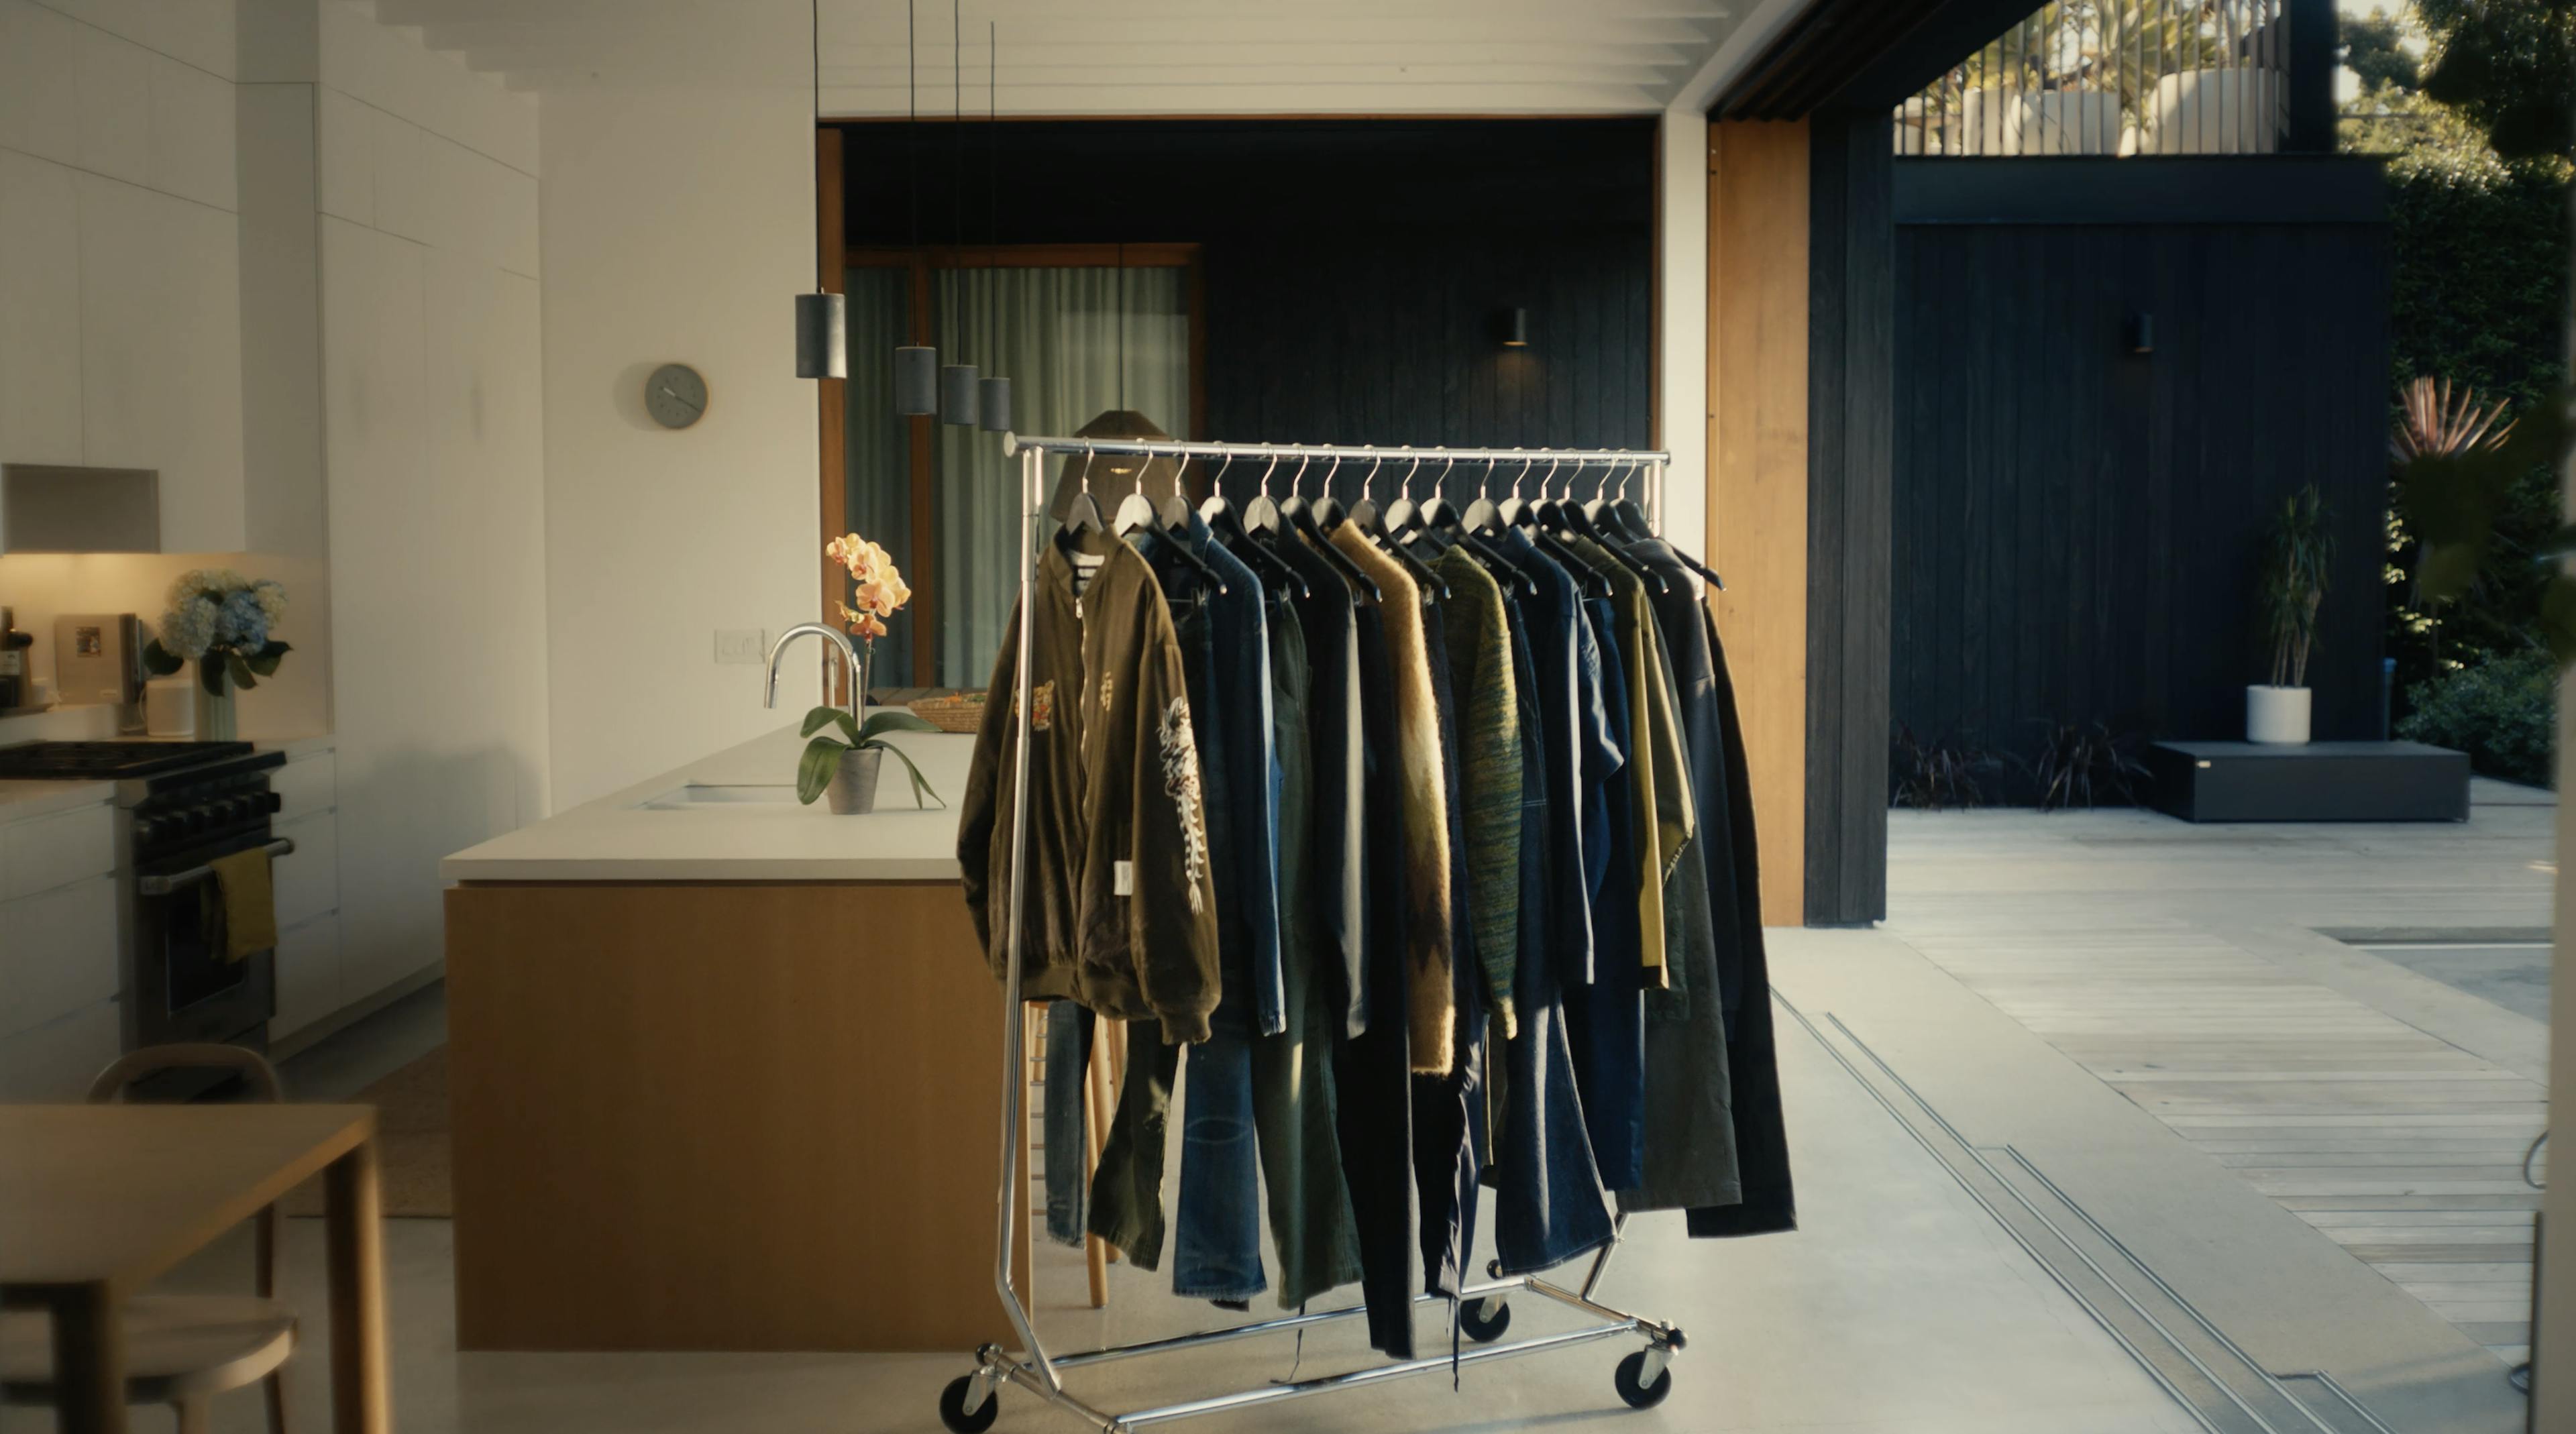 A clothing rack sits in a cleanly furnished space that opens to the outdoor patio